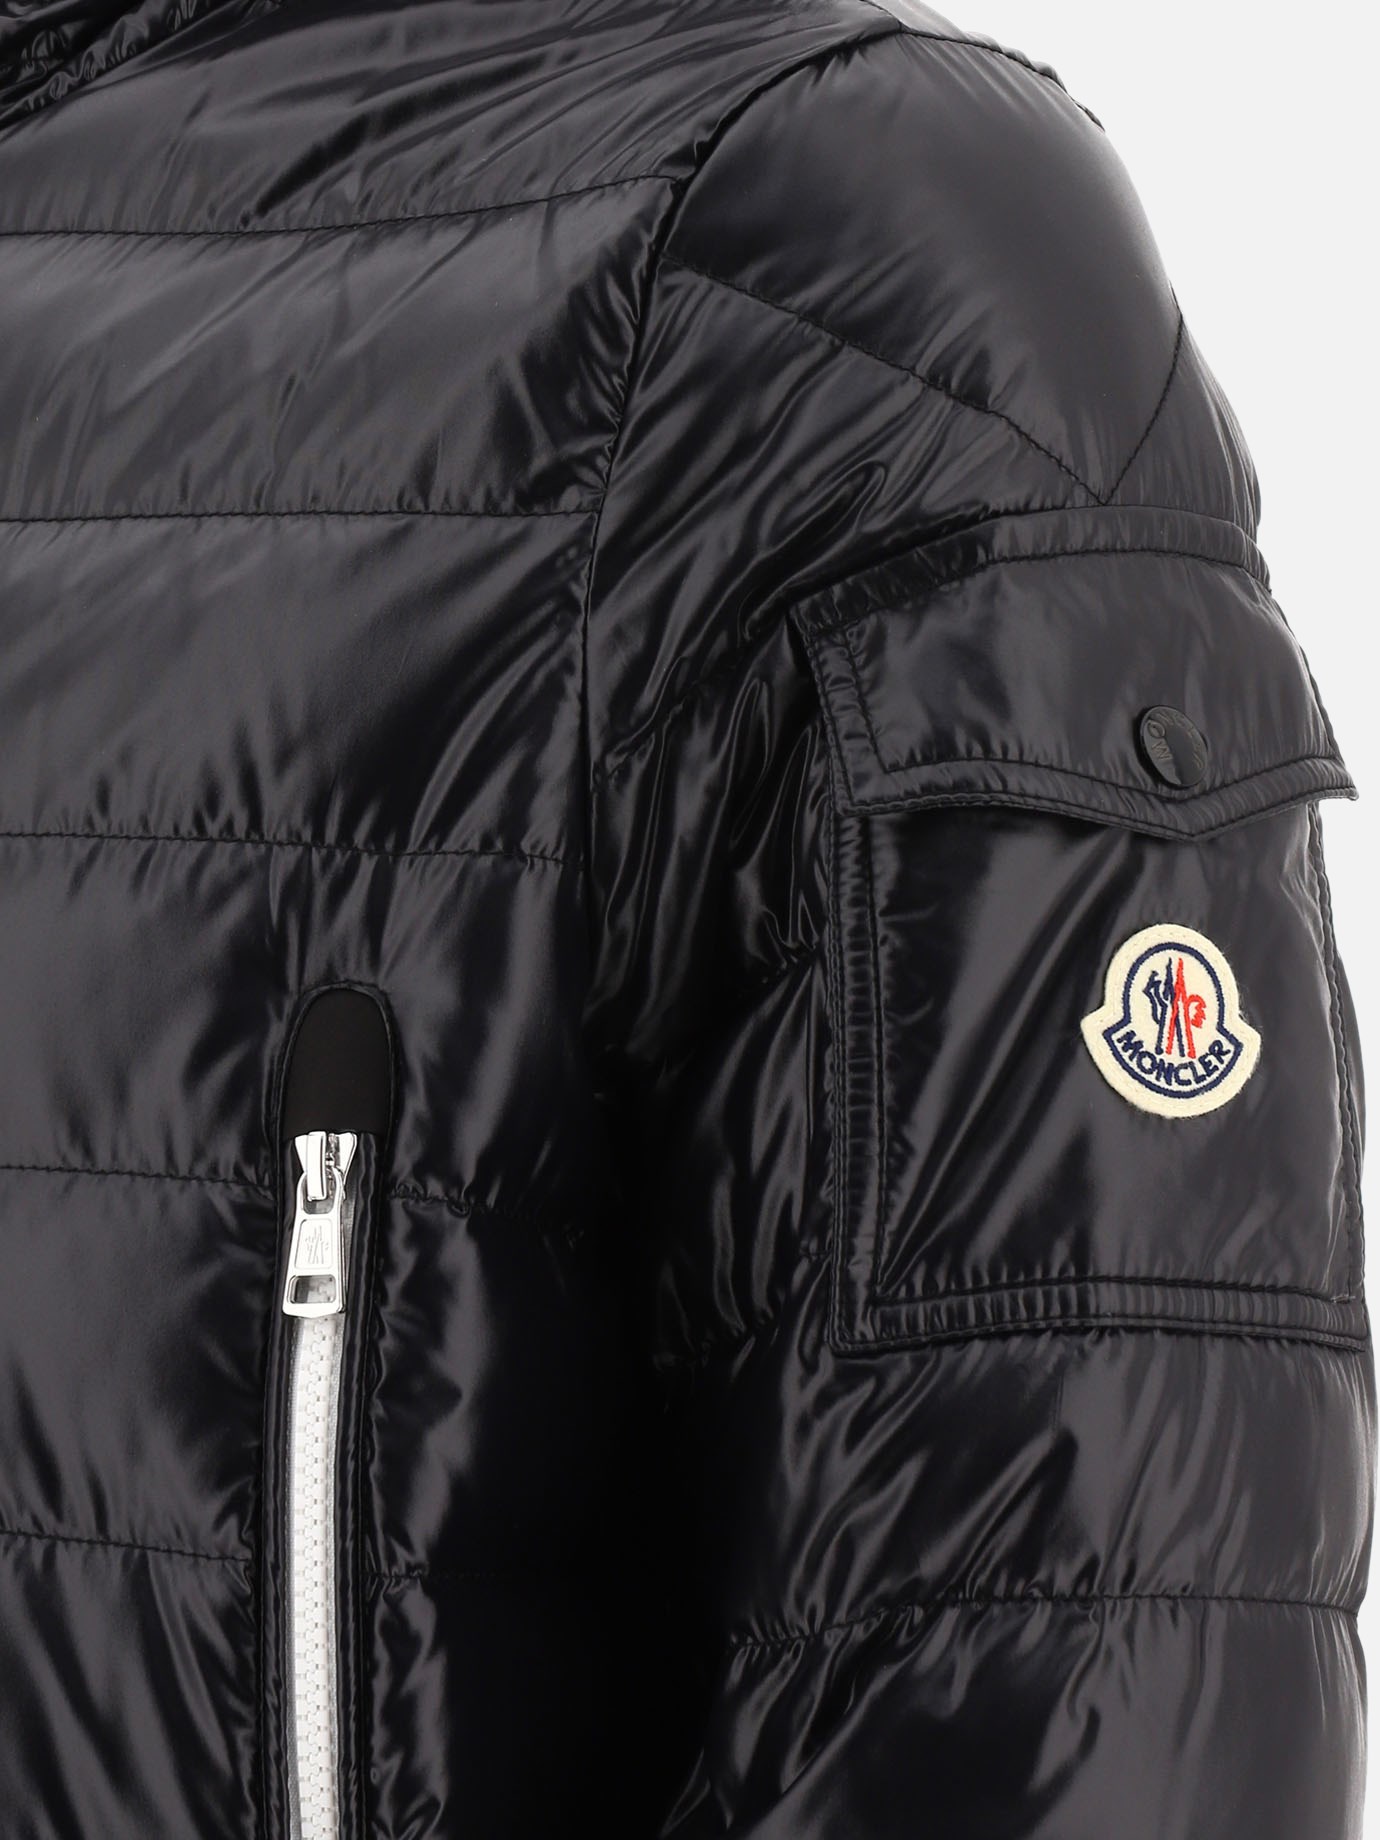  Galion  down jacket by Moncler